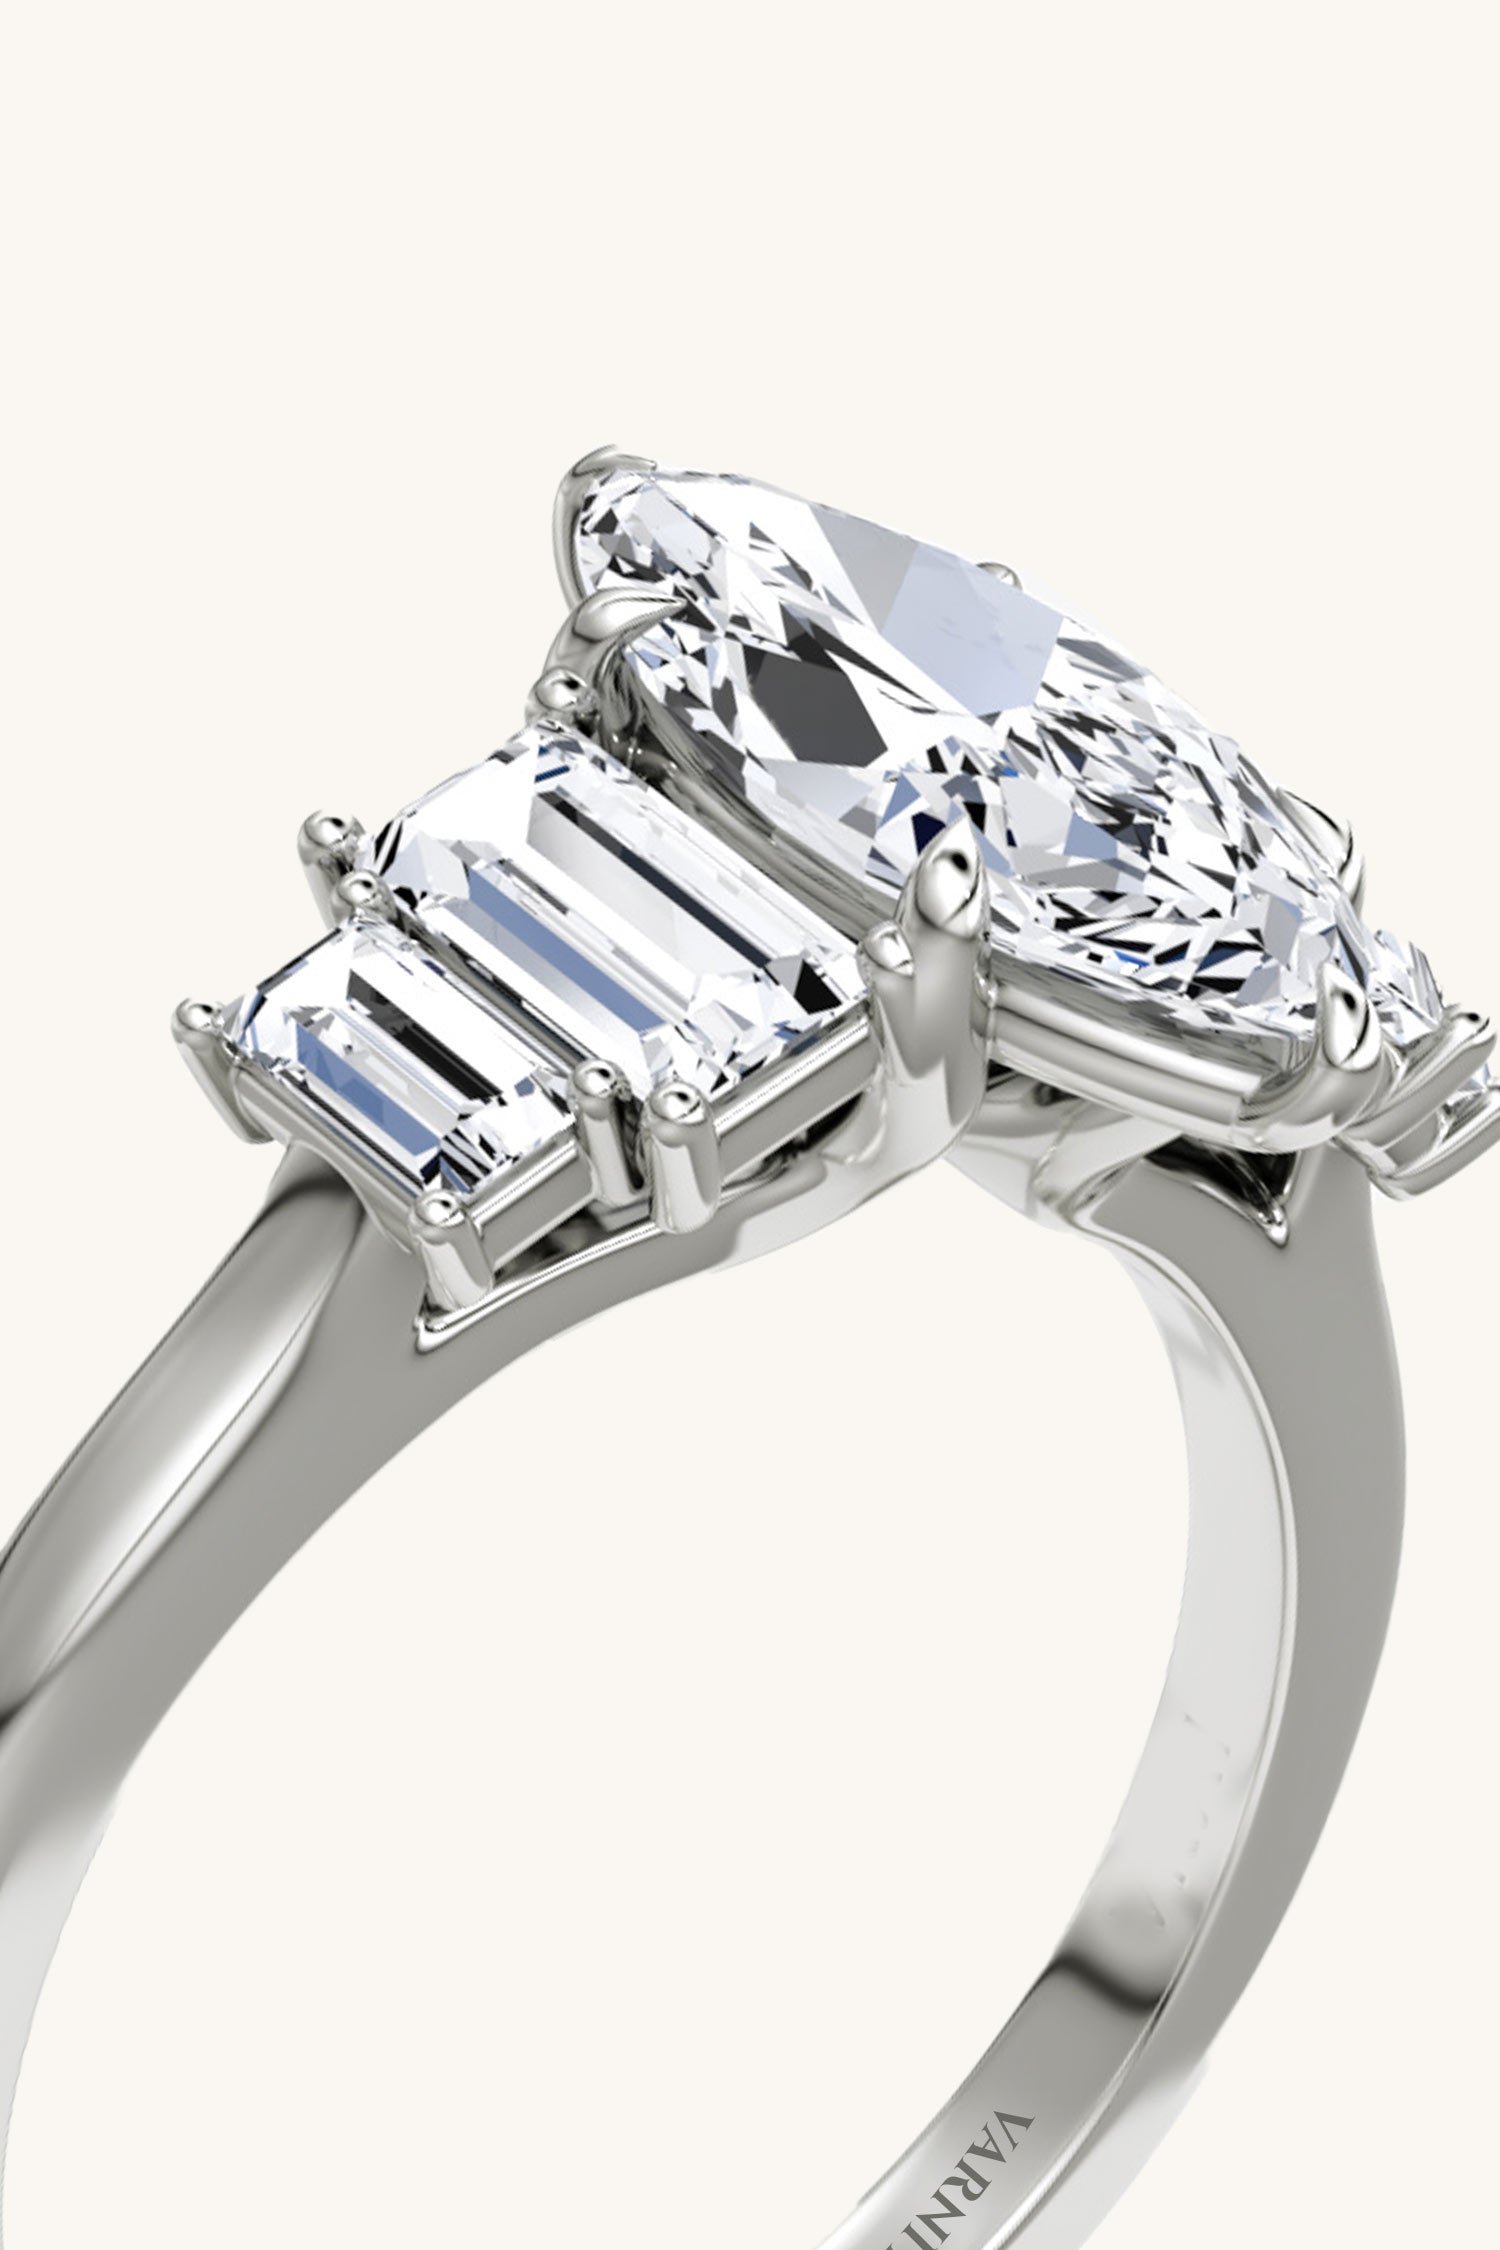 Panchsheel Marquise Solitaire Ring